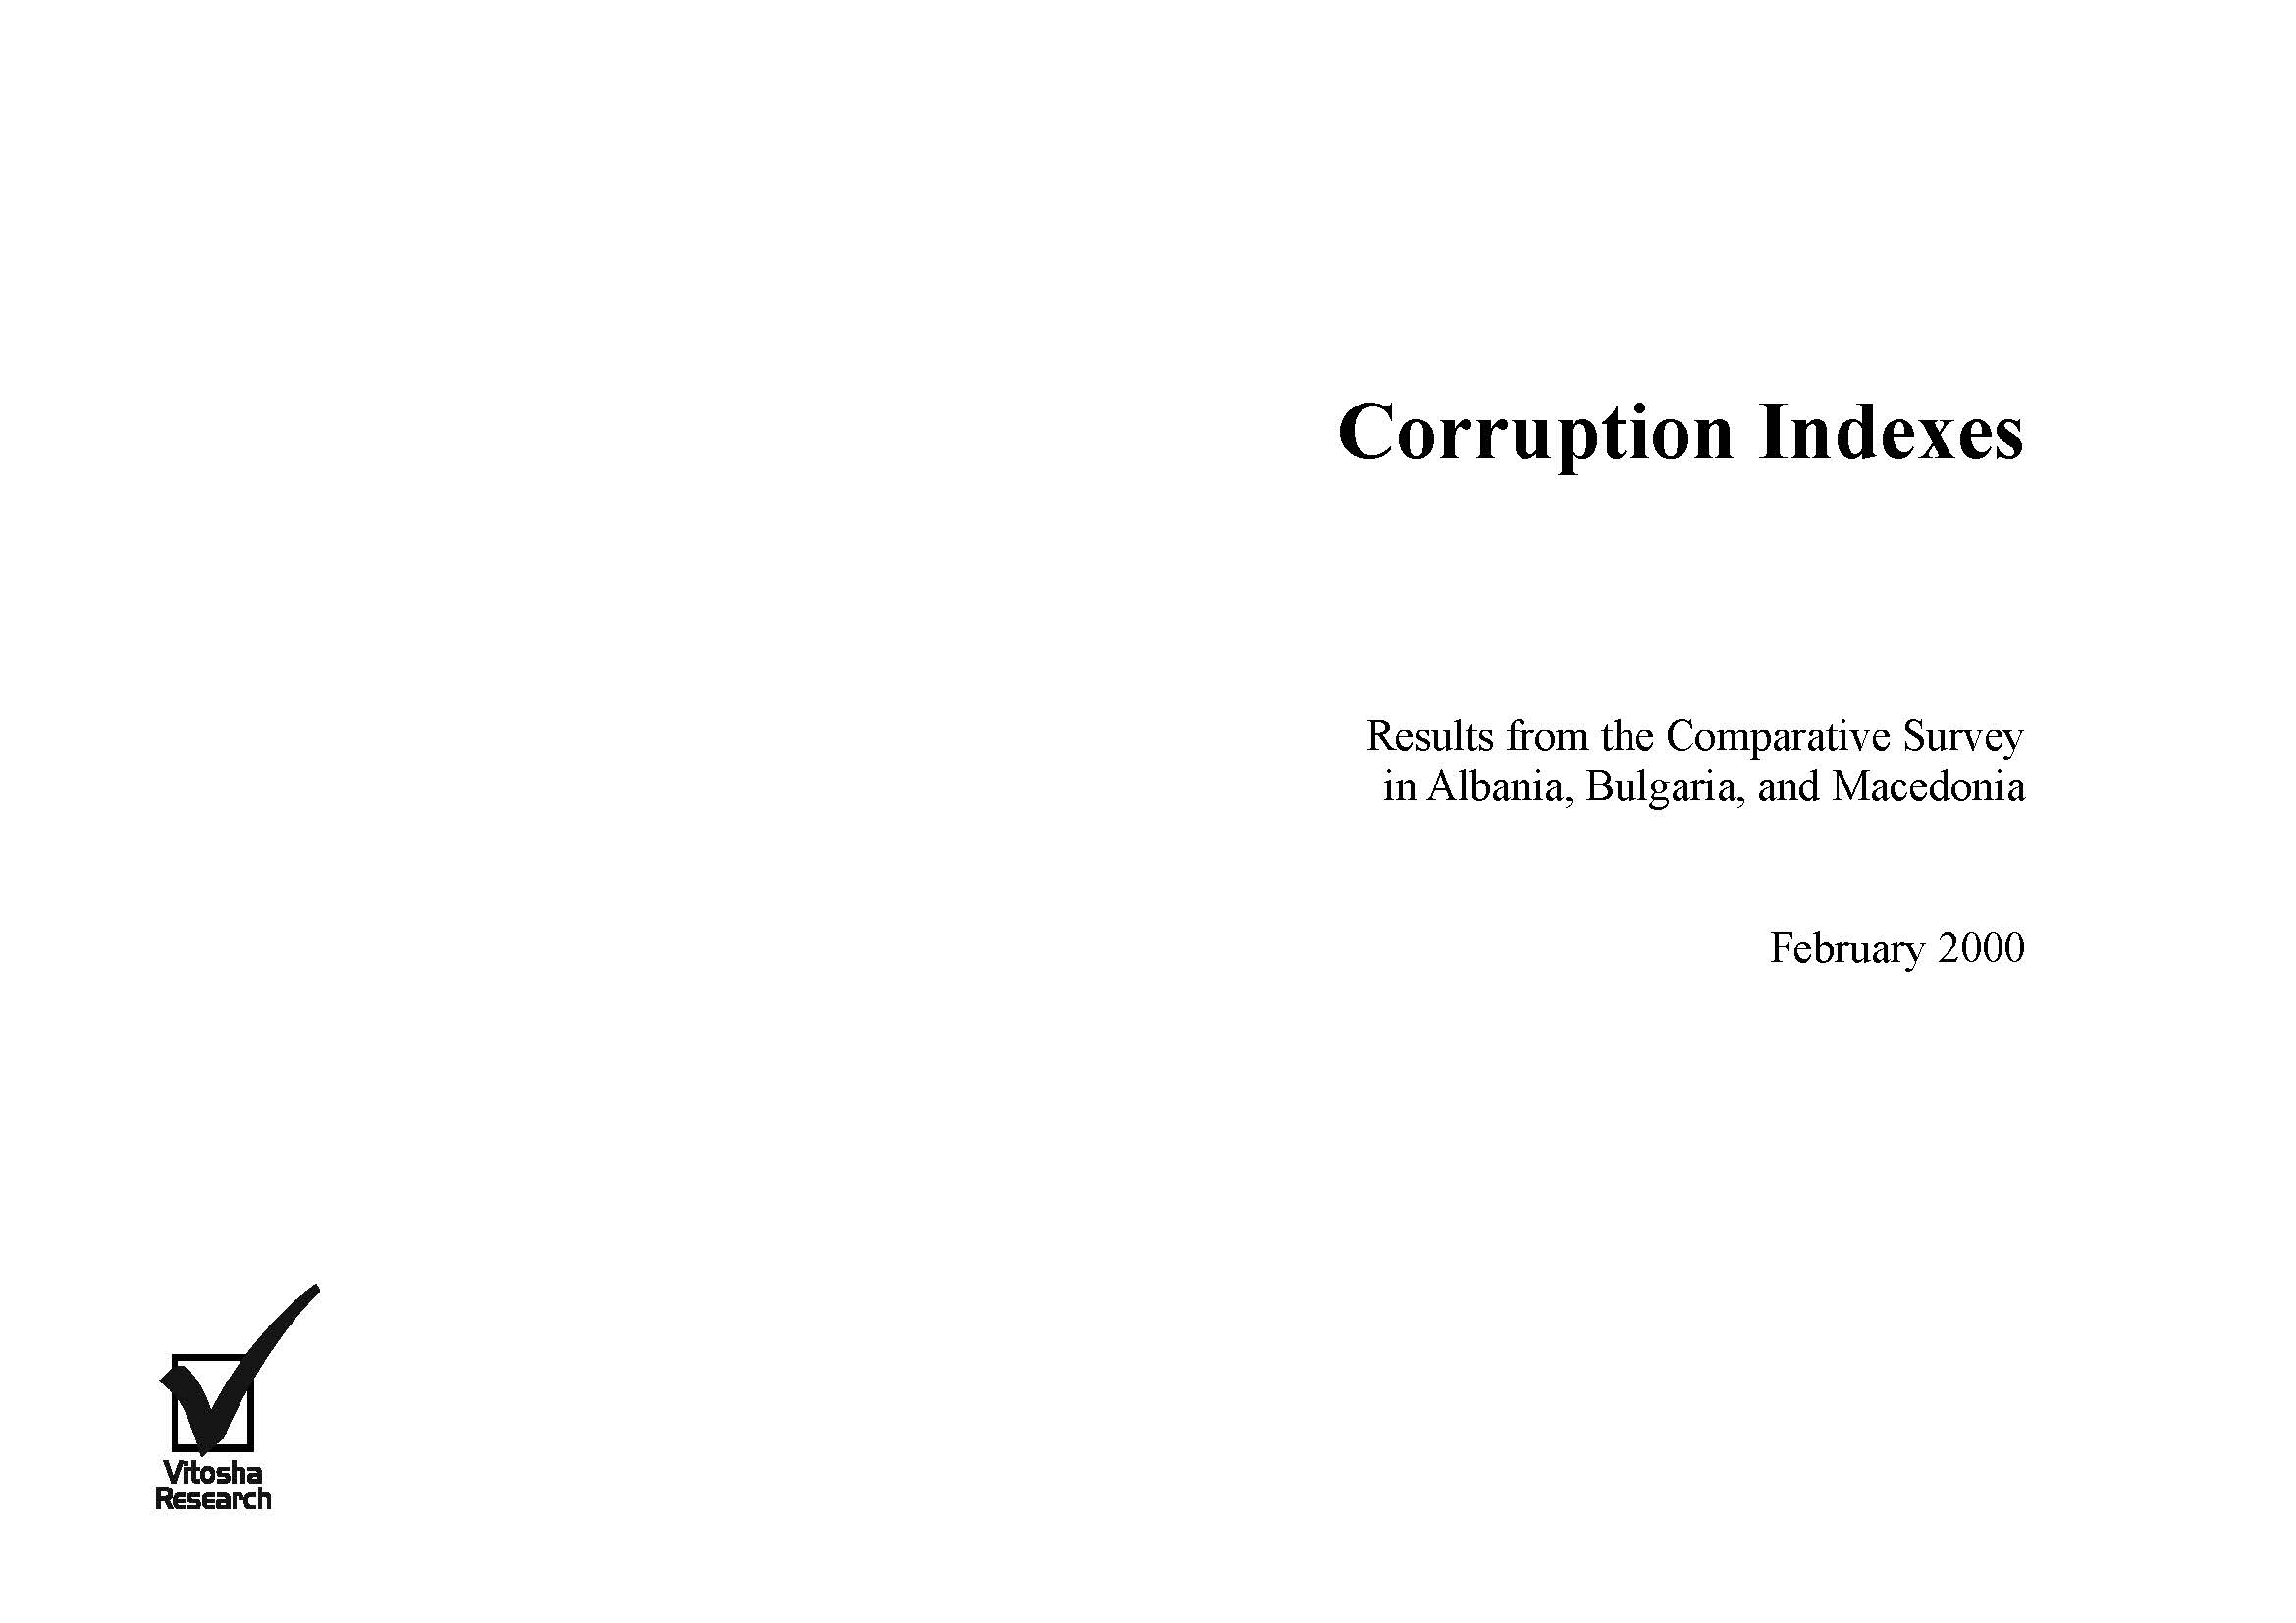 Corruption Indexes, Results from the Comparative Survey in Albania, Bulgaria, and Macedonia, February 2000